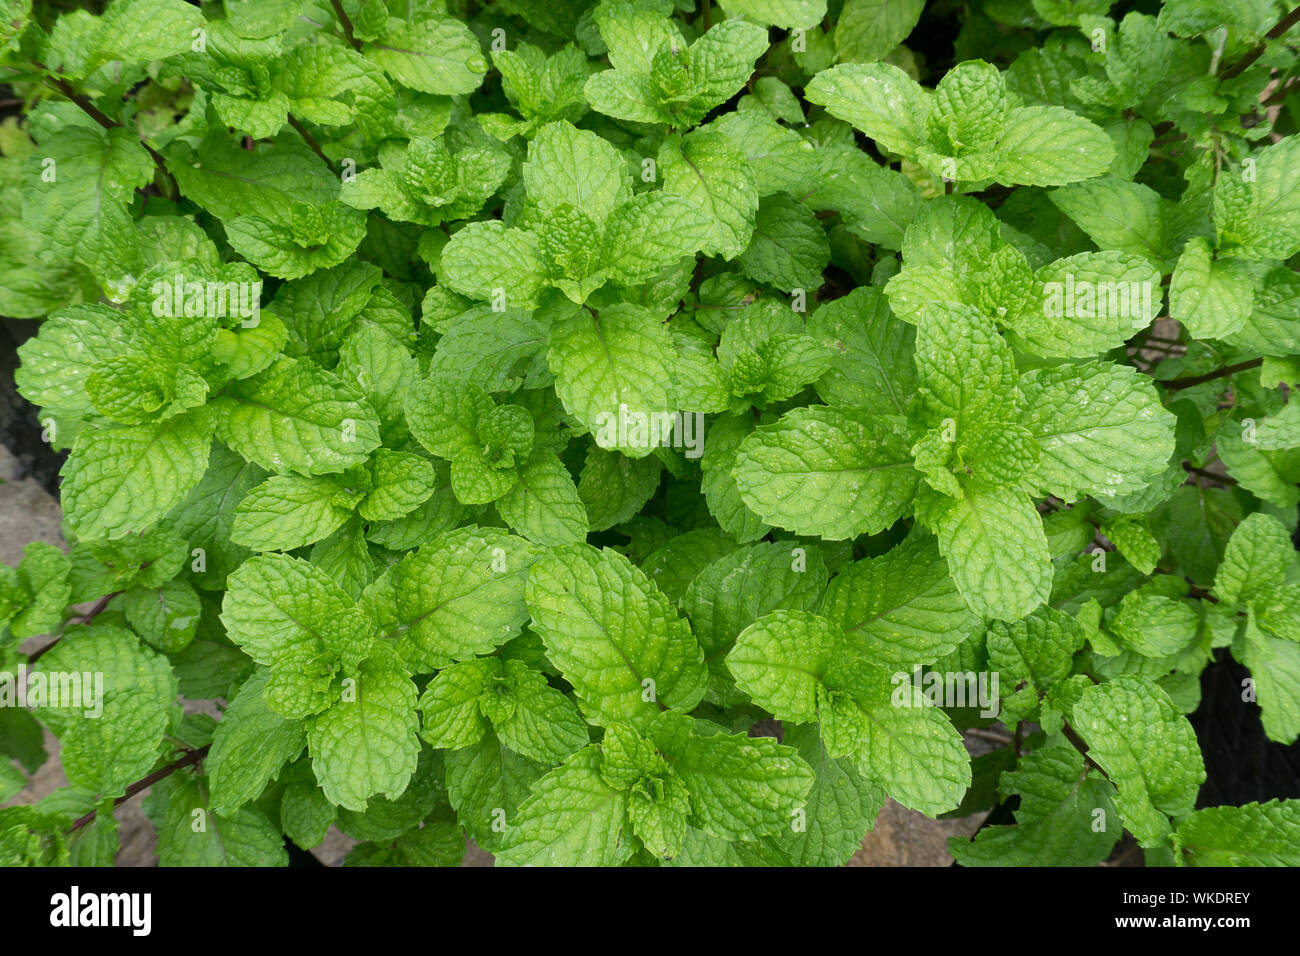 High Angle View Of Mint Leaf Plants Stock Photo